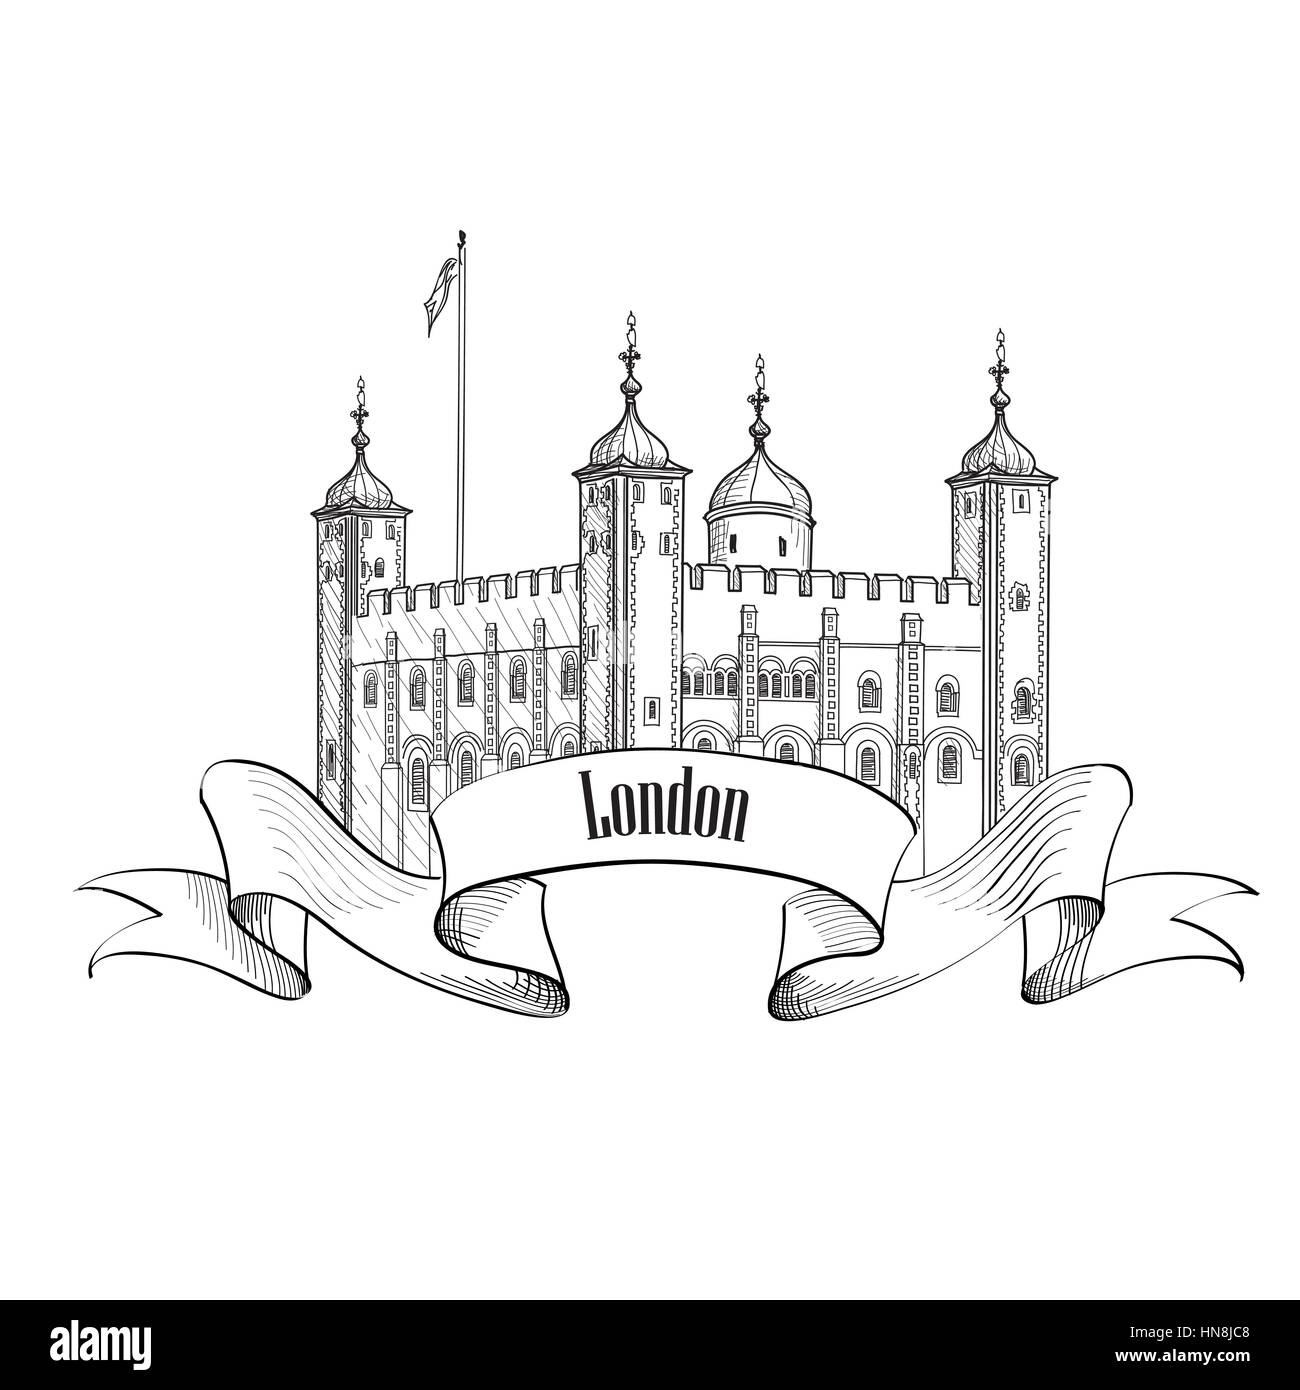 Tower of London famous building, London, England, UK. London symbol vintage sketch label isolated. Stock Vector